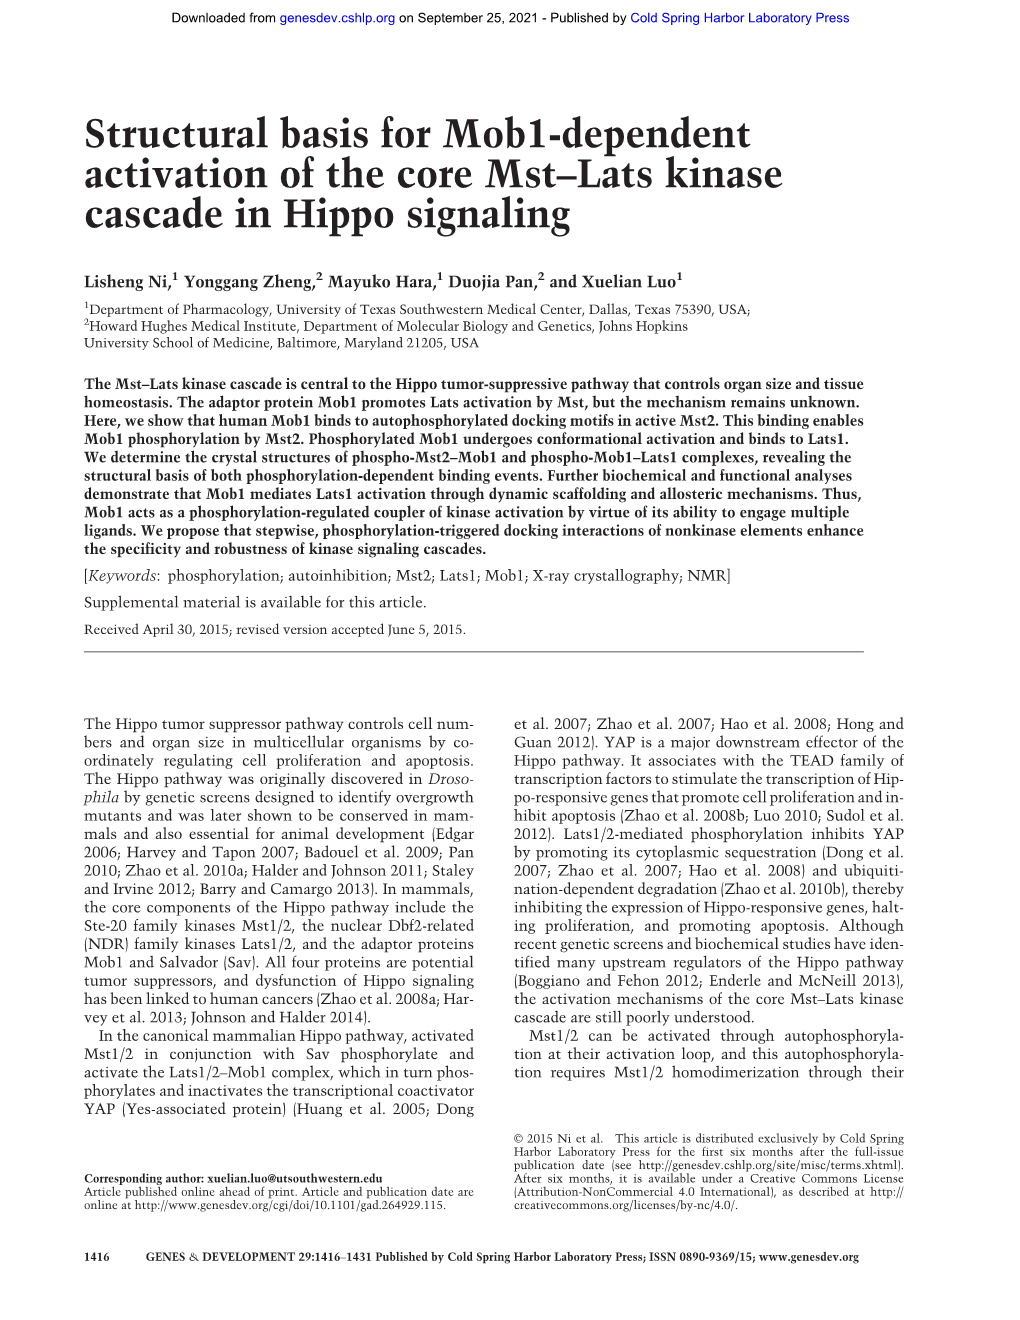 Structural Basis for Mob1-Dependent Activation of the Core Mst–Lats Kinase Cascade in Hippo Signaling